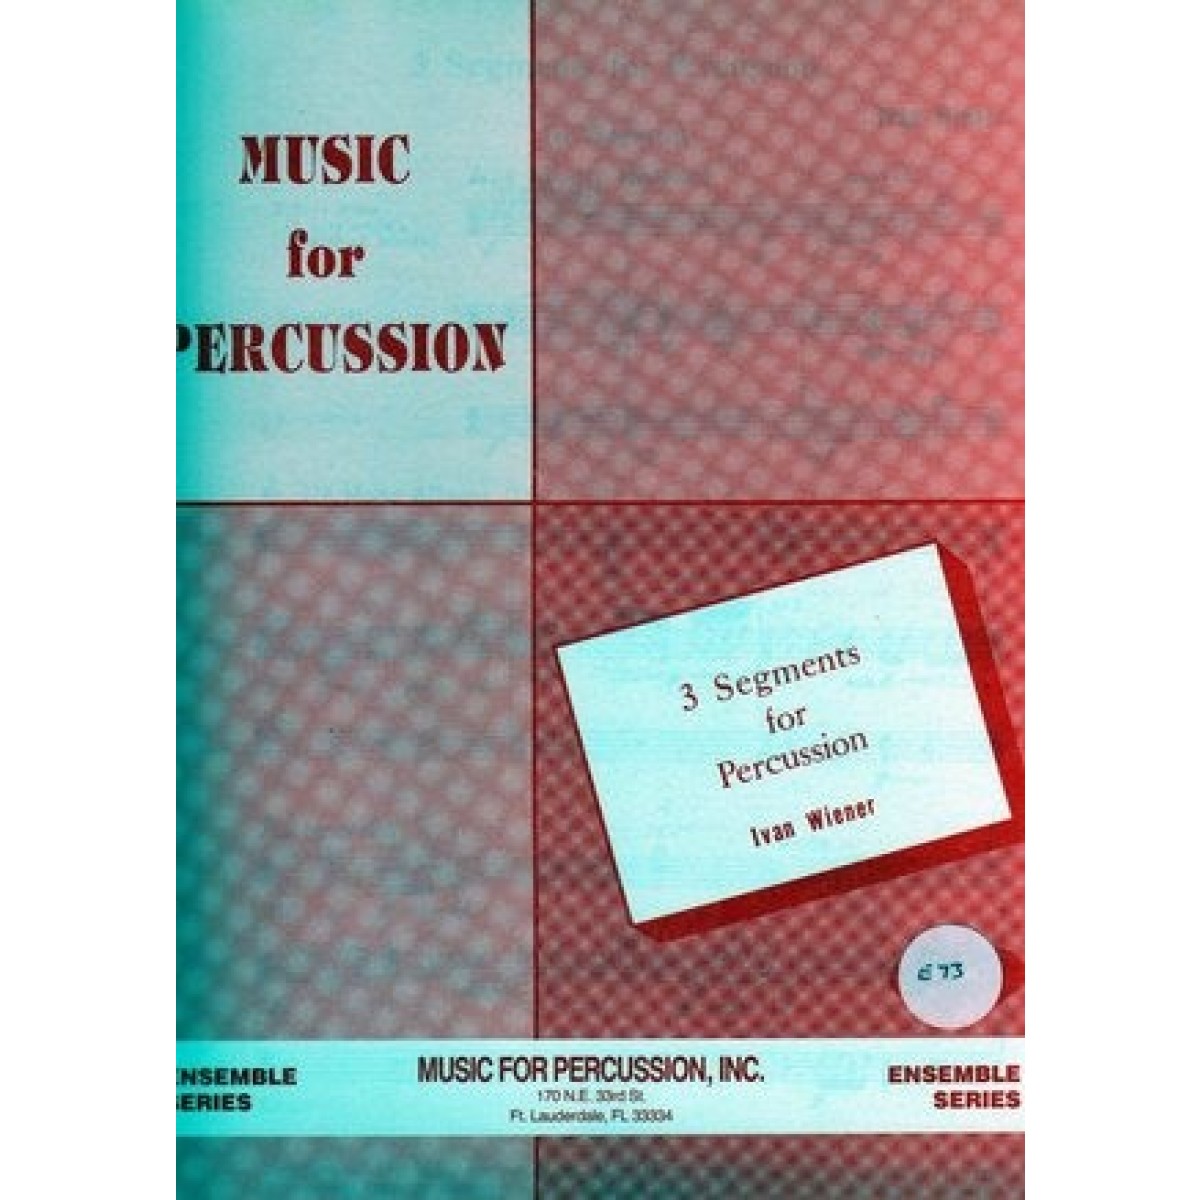 3 Segments For Percussion by Ivan Wiener